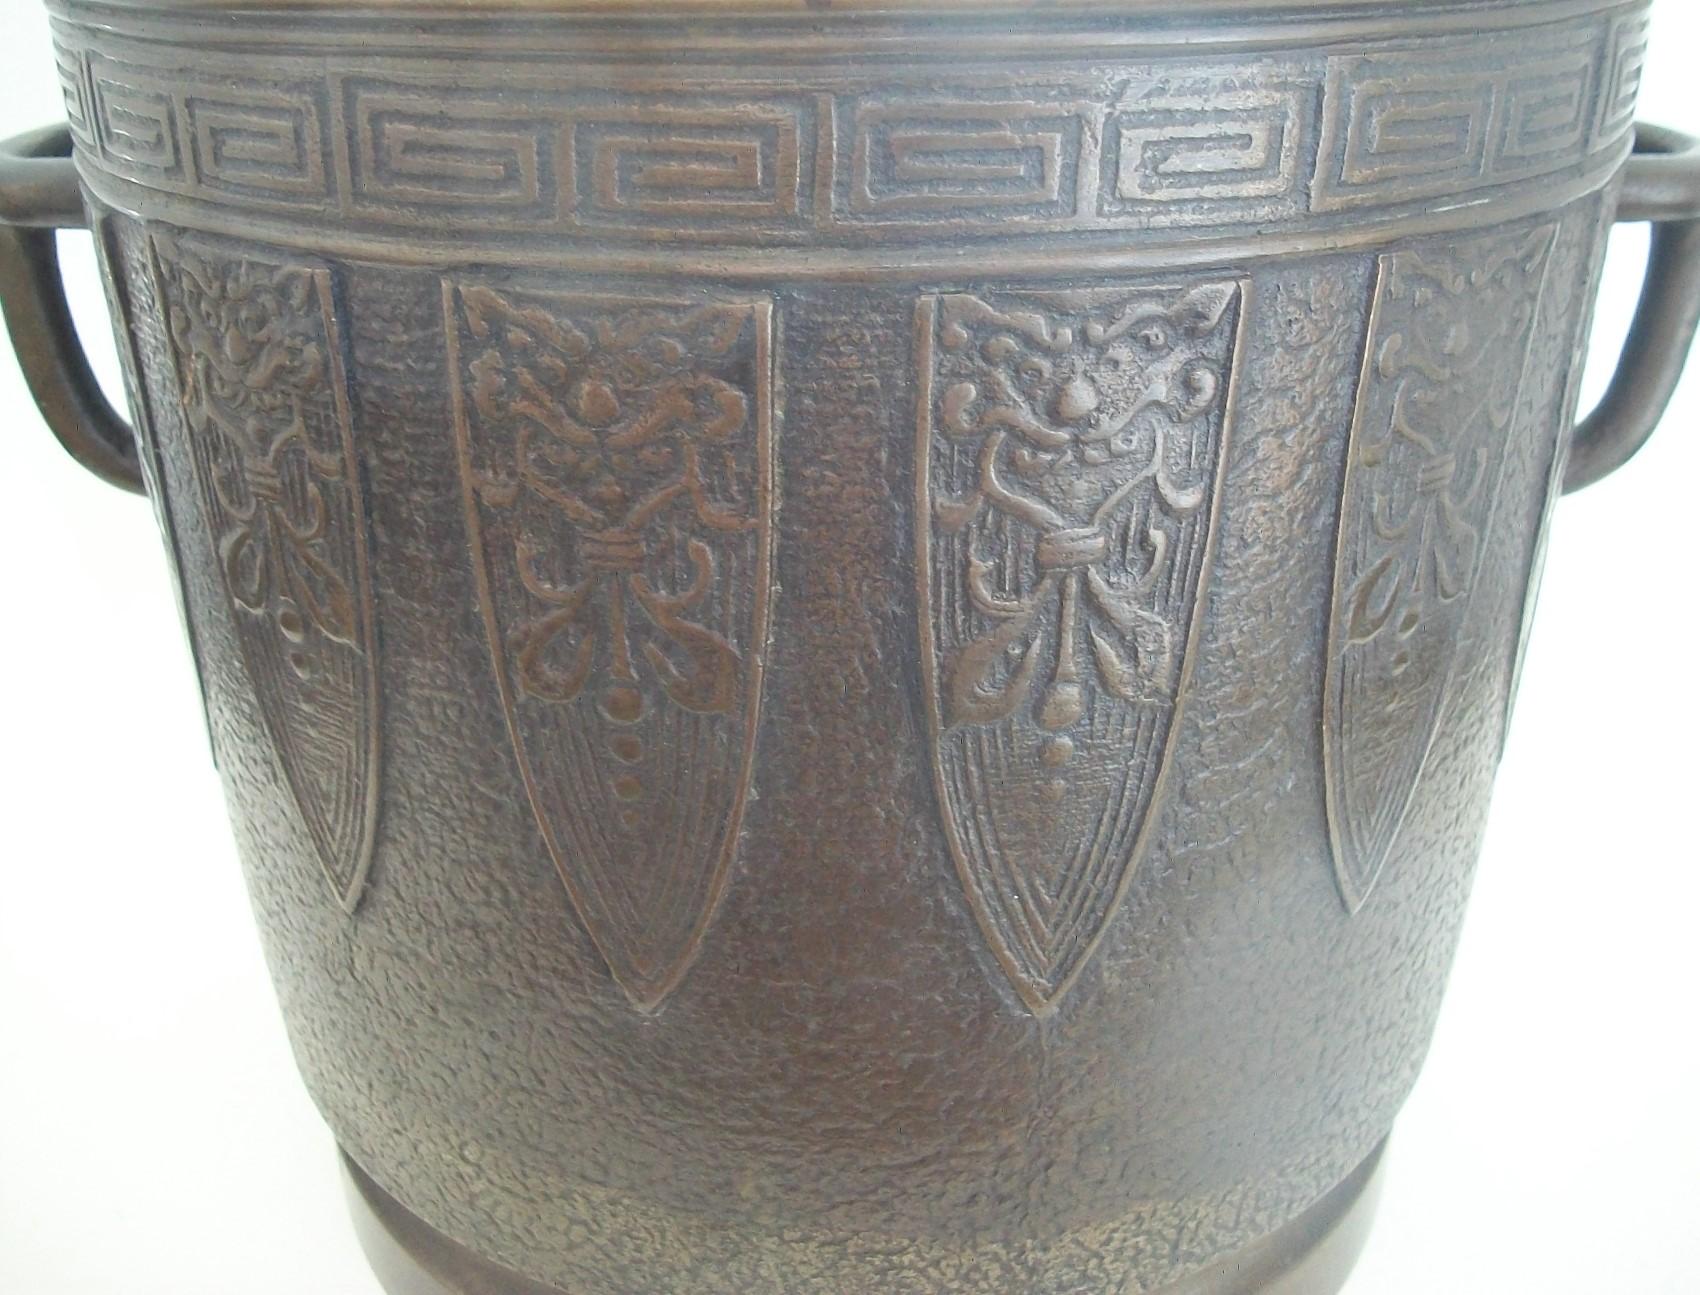 Antique Archaic Style Patinated Bronze Planter, China, Early 20th Century For Sale 4